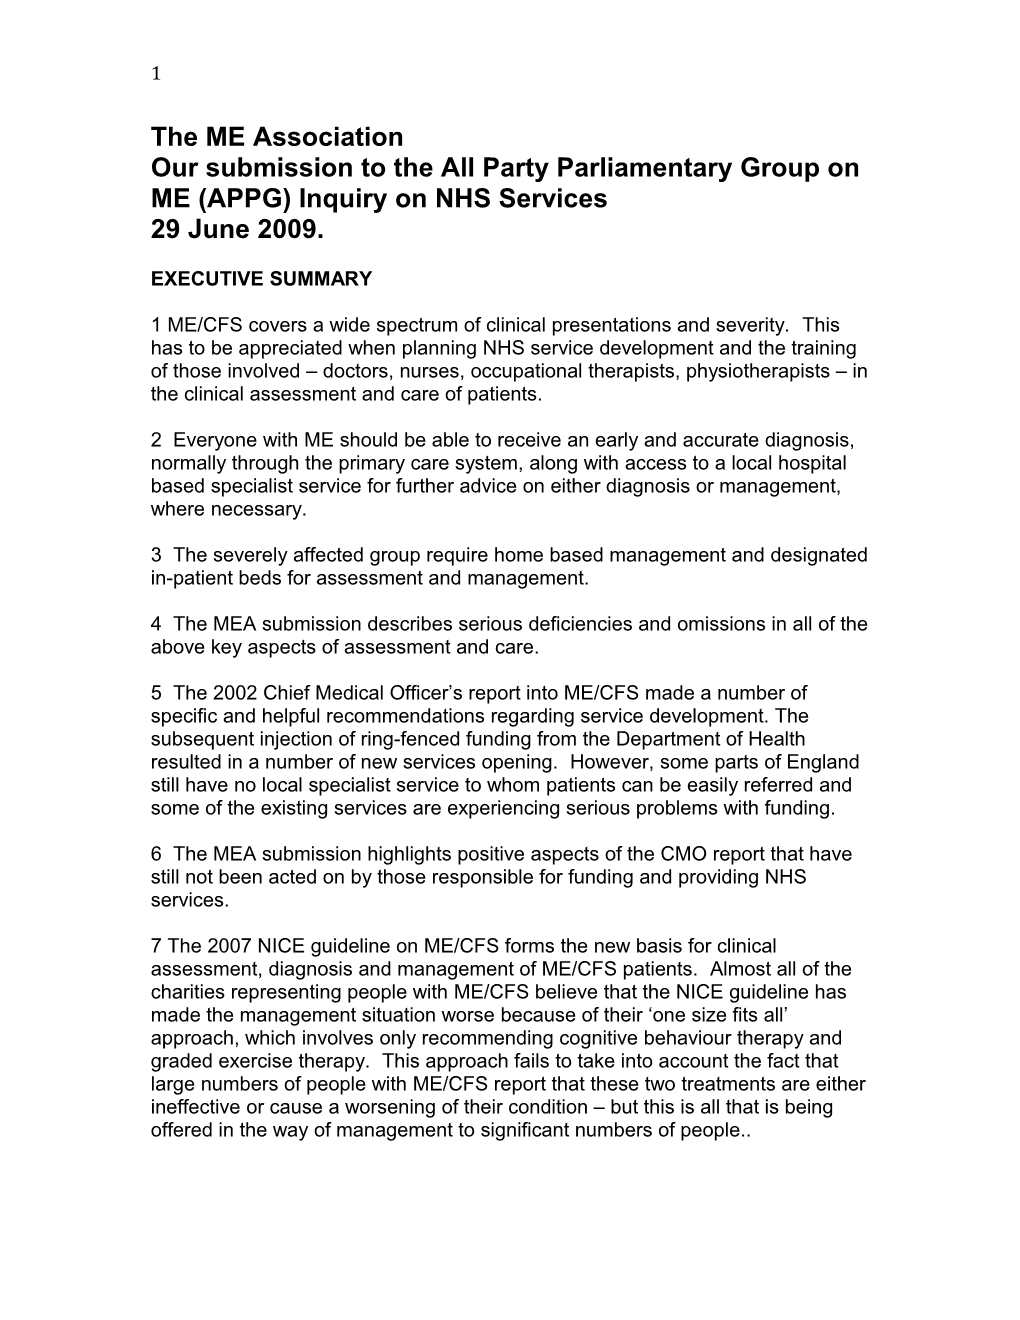 Our Submission to the All Party Parliamentary Group on ME (APPG) Inquiry on NHS Services